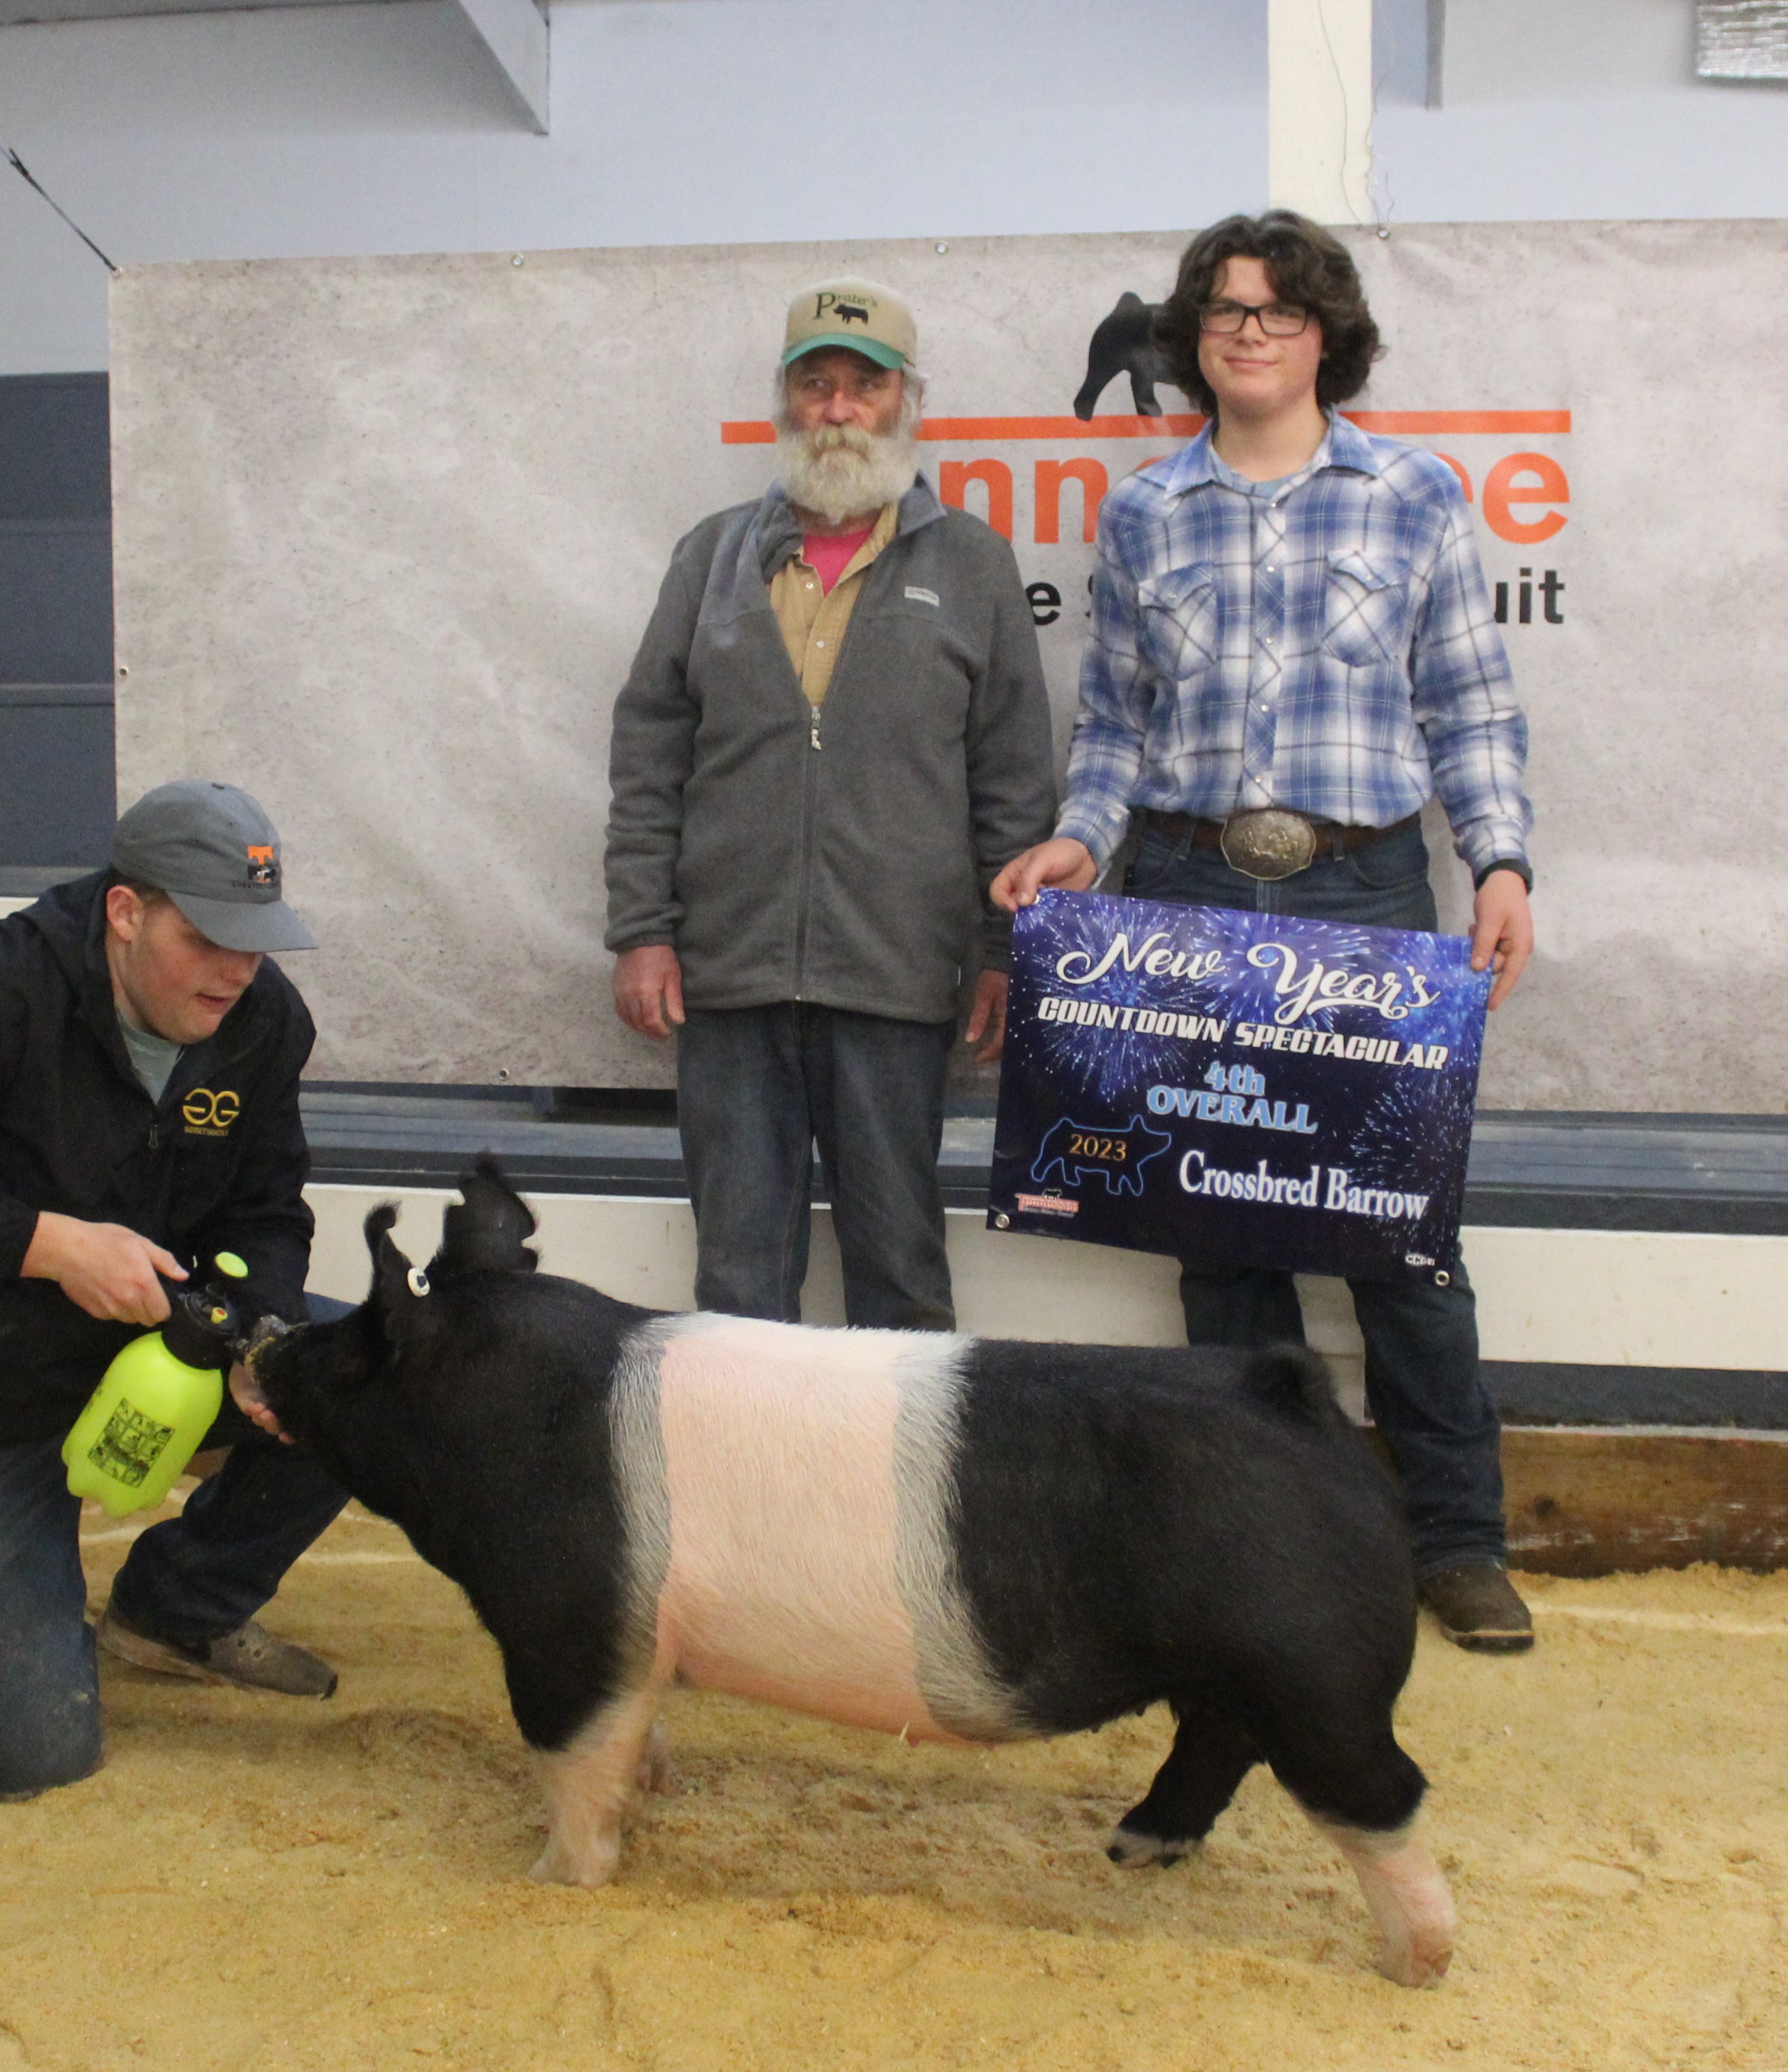 Wayne Hansel
2022 New Year's Countdown Spectacular
Day 2 - 4th Overall Crossbred Barrow